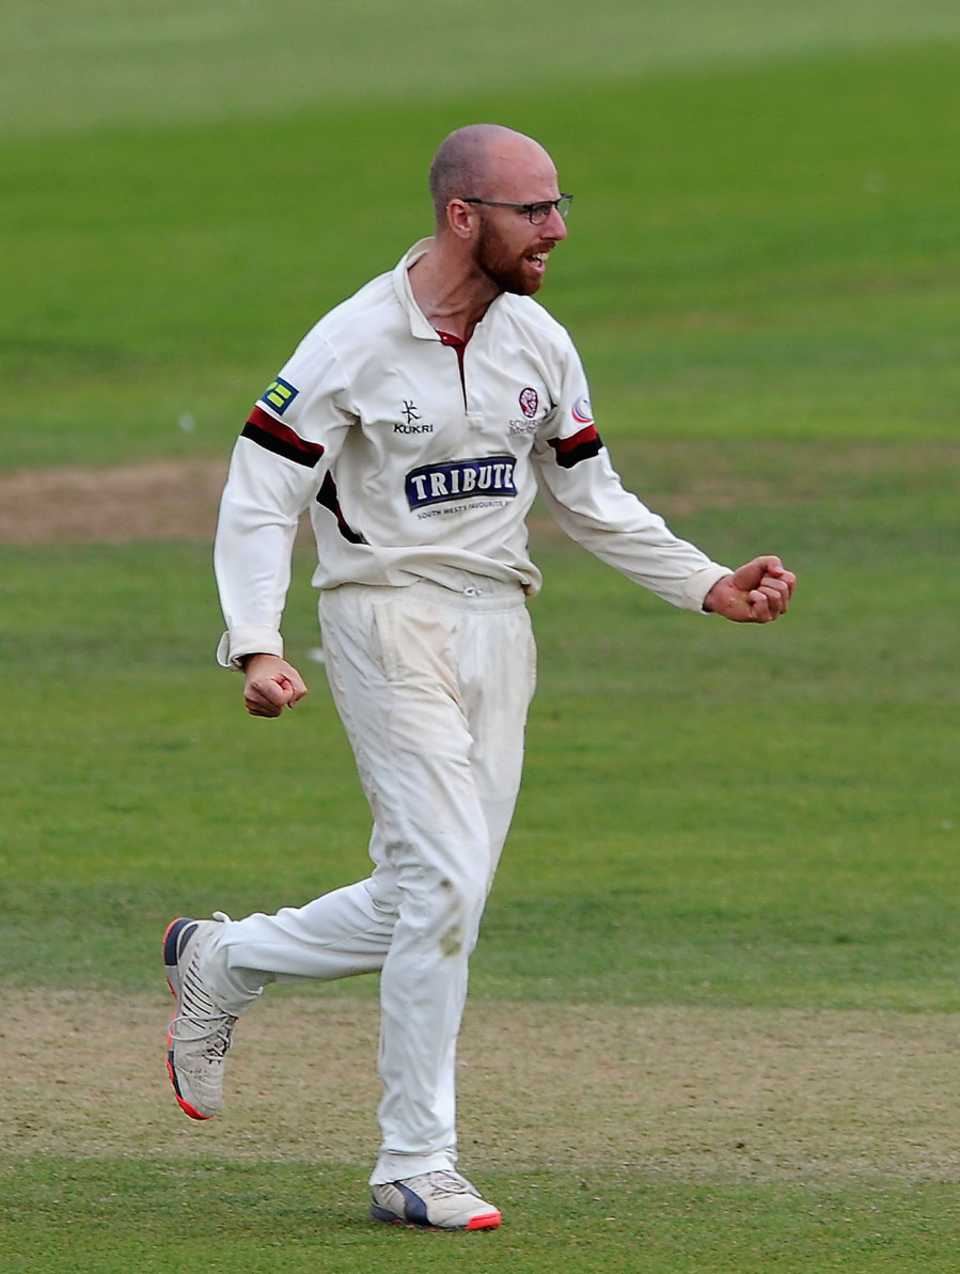 Jack Leach broke an opening stand of 143